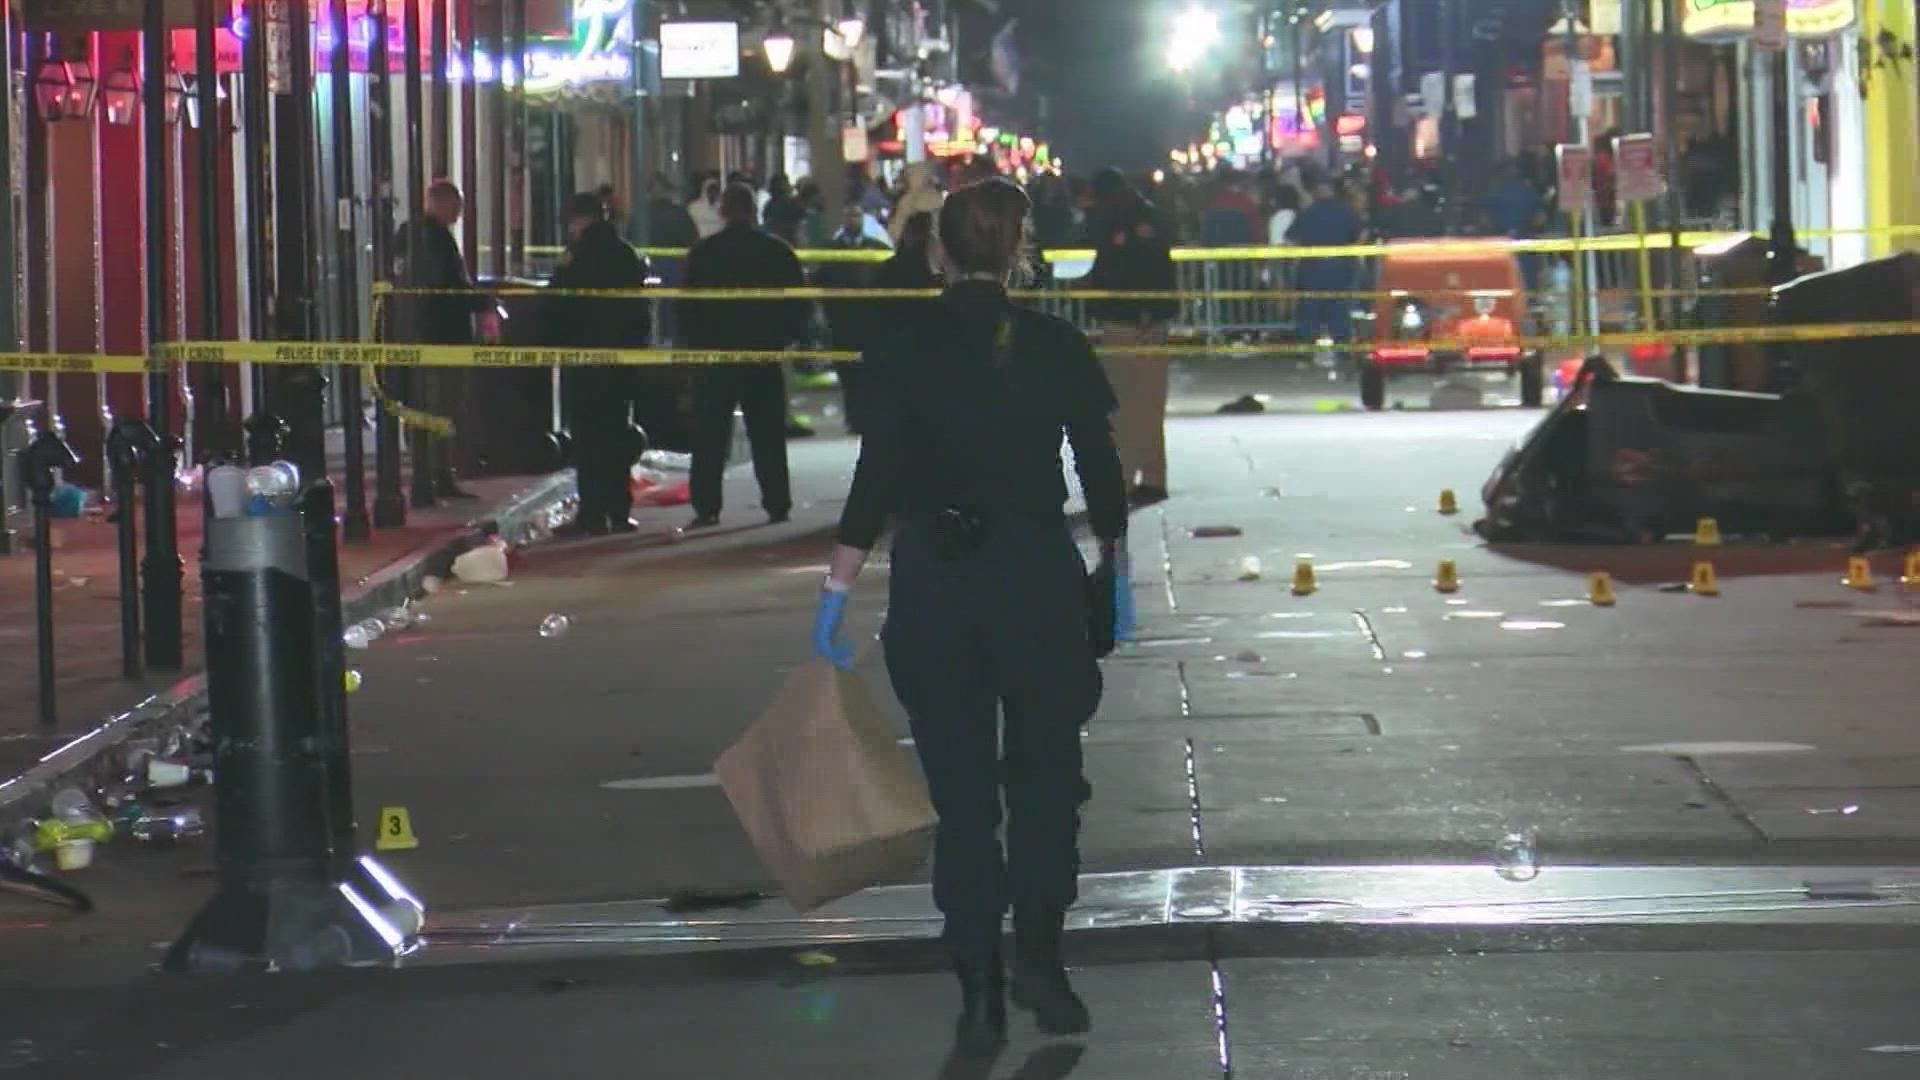 Two people were detained for questioning after the shooting on Bourbon Street near Canal Street.